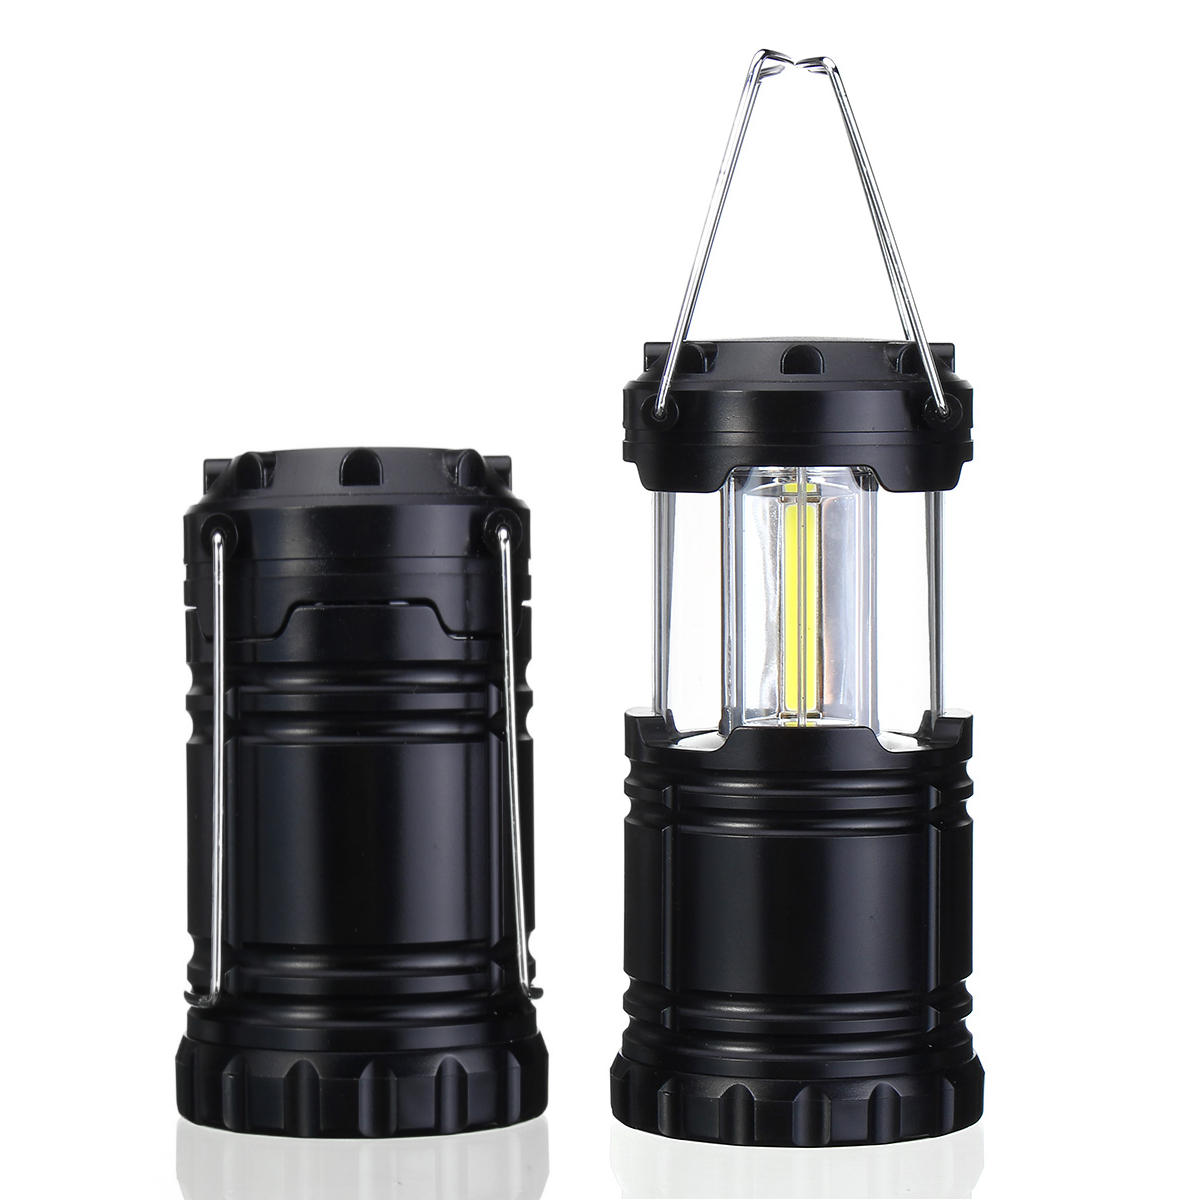 Portable LED Camping Lantern Flashlight 3 AA Batteries Survival Kits for Outdoor Hiking Travel